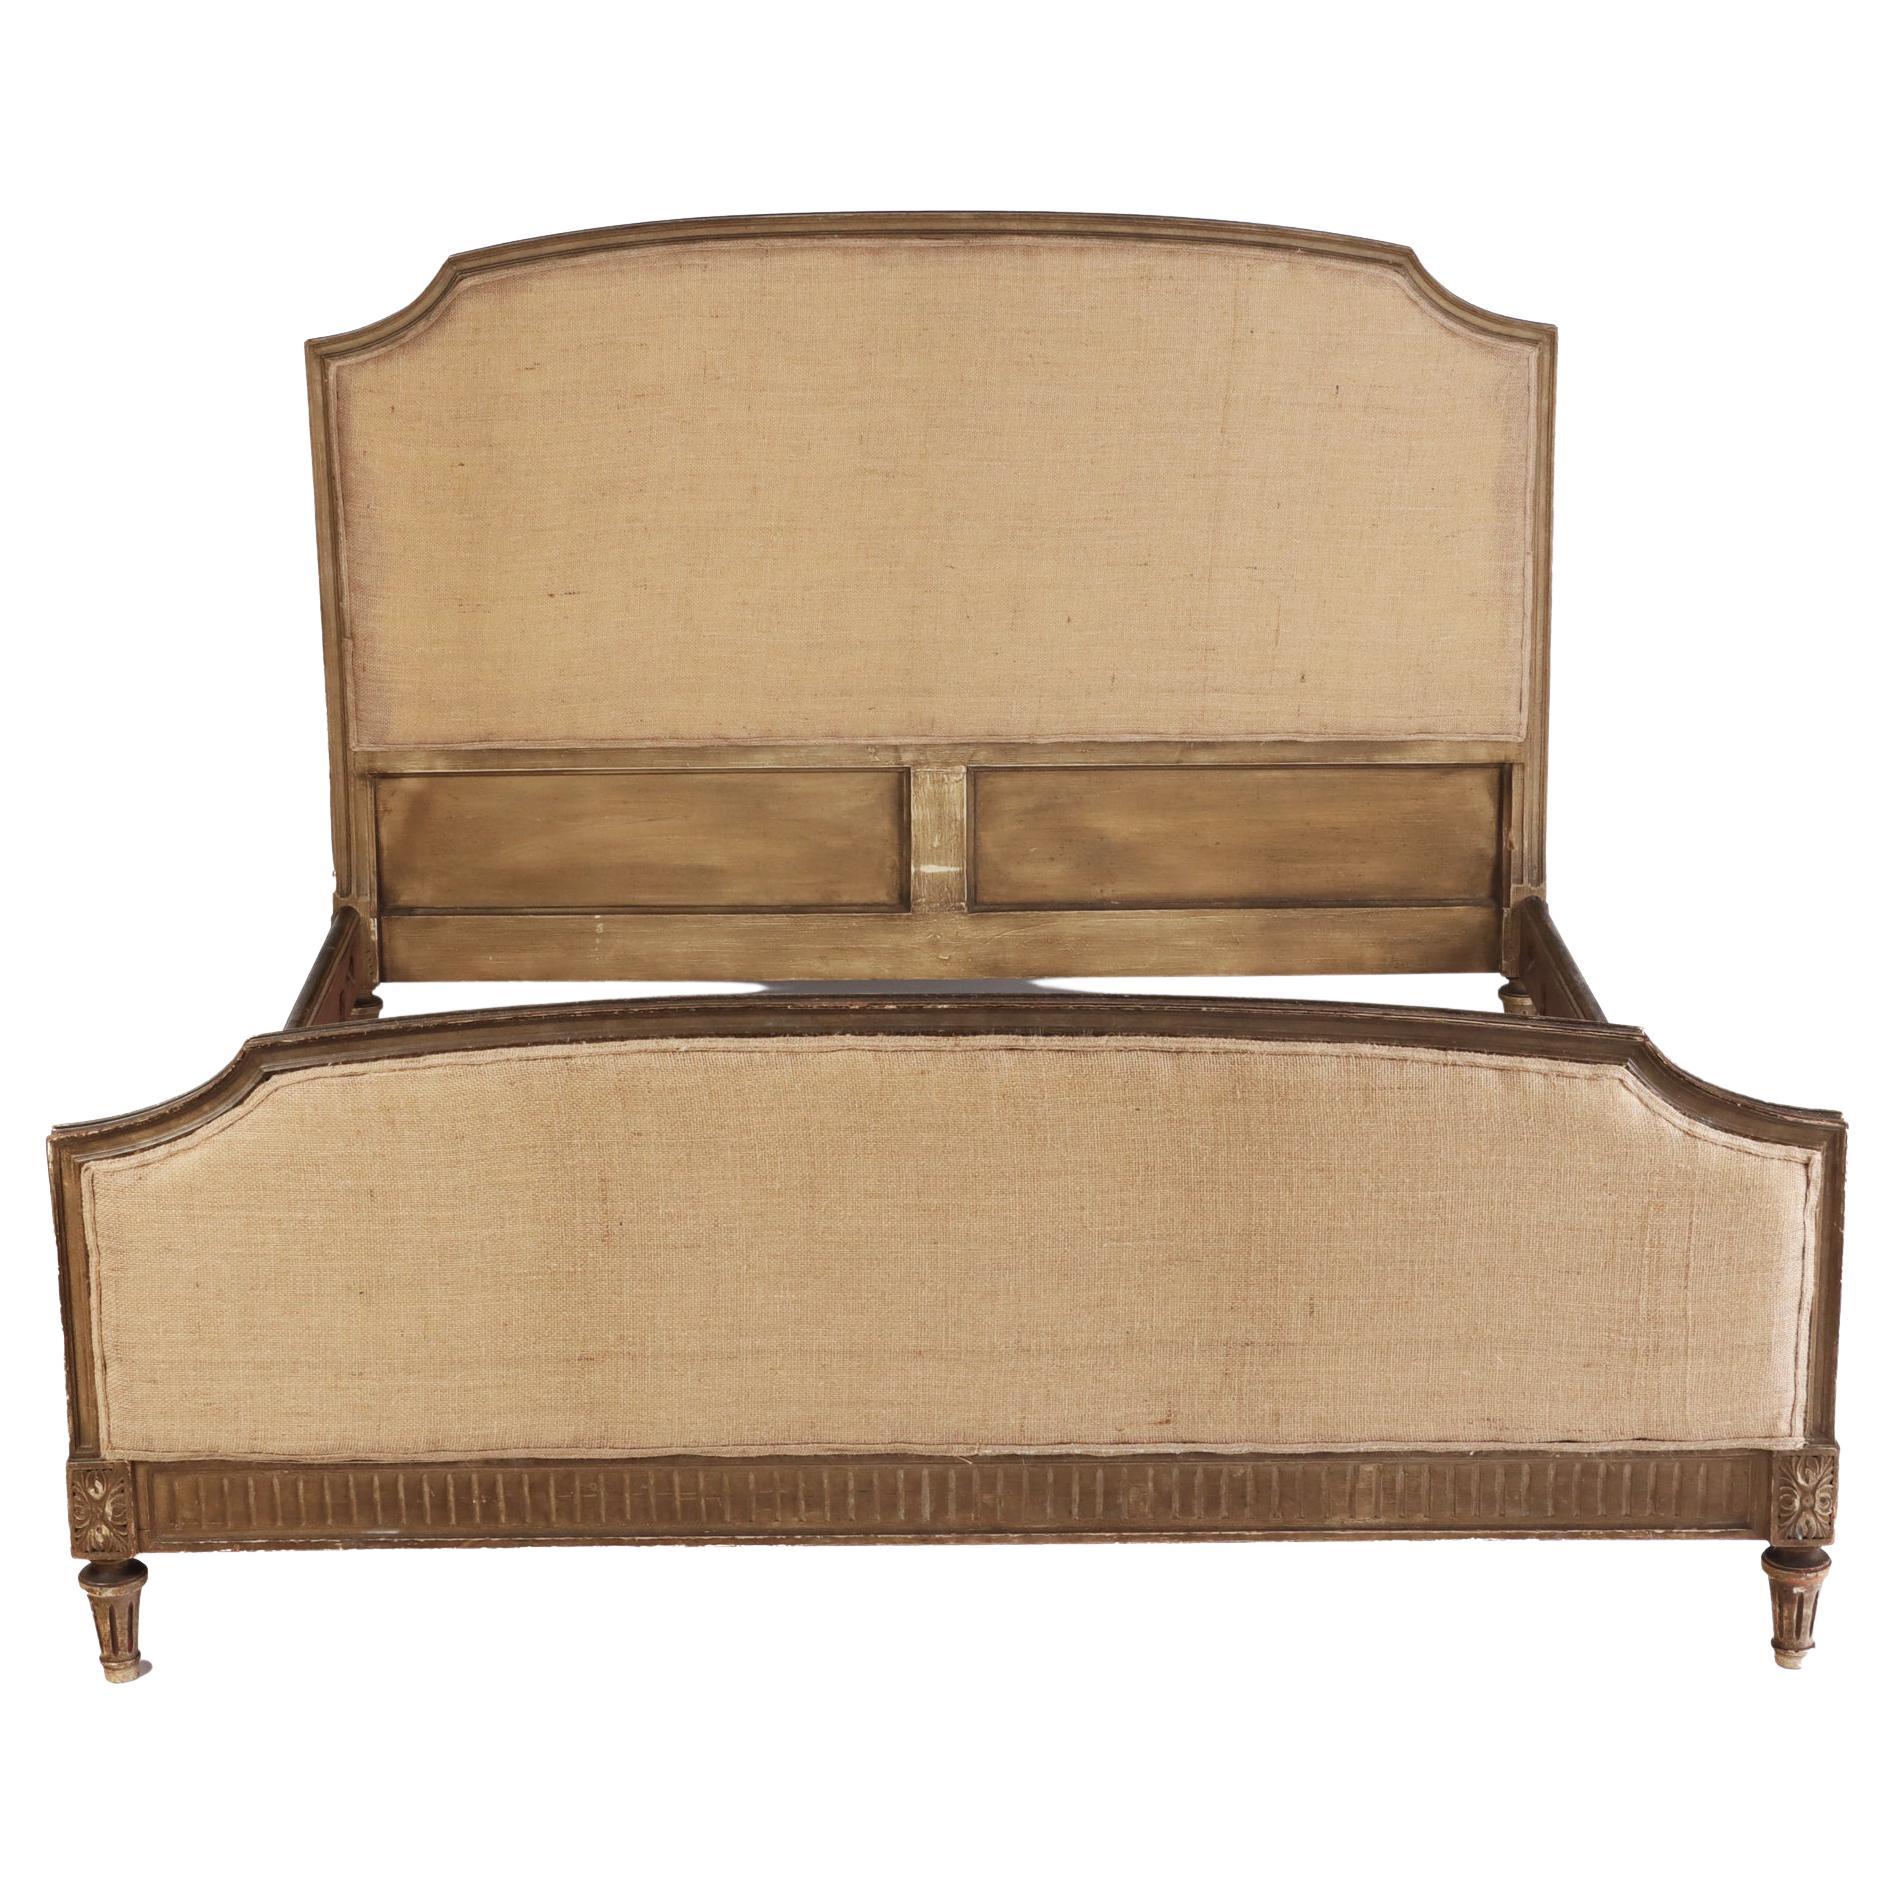 French Louis XVI Style Queen Size Bed with Burlap Upholstery, circa 1940